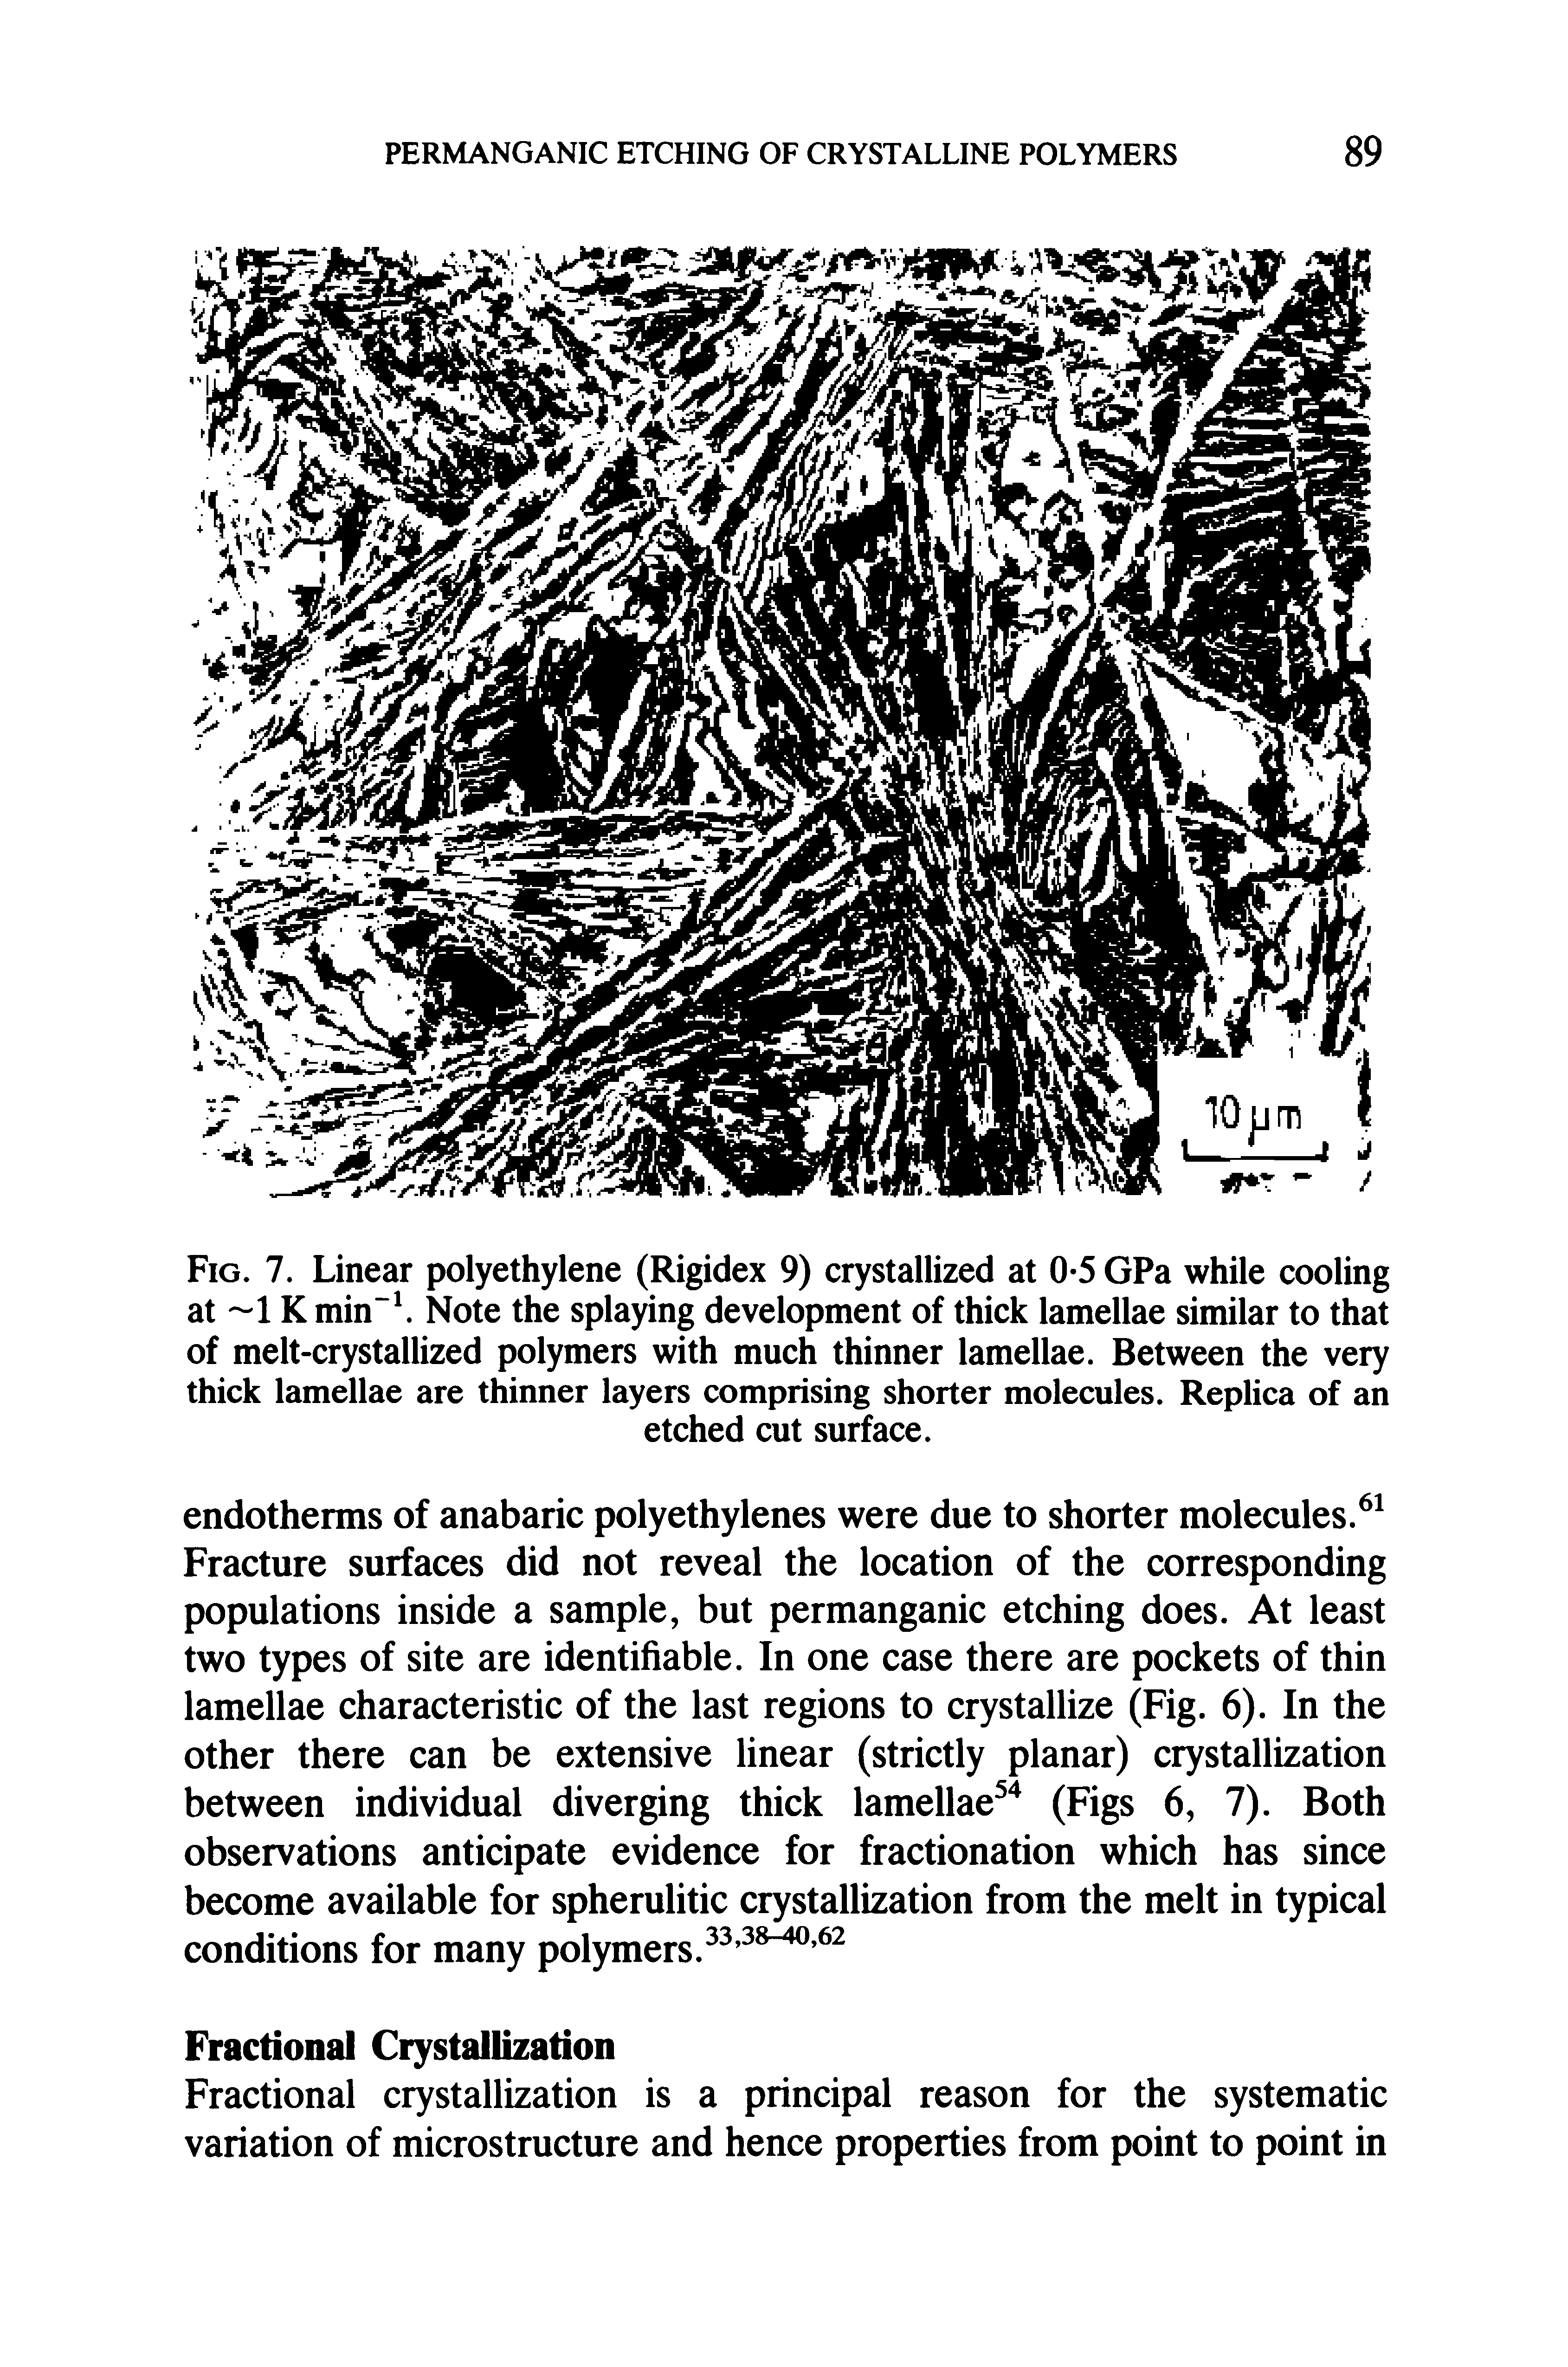 Fig. 7. Linear polyethylene (Rigidex 9) crystallized at 0-5 GPa while cooling at 1 Kmin . Note the splaying development of thick lamellae similar to that of melt-crystallized polymers with much thinner lamellae. Between the very thick leunellae are thinner layers comprising shorter molecules. Replica of an...